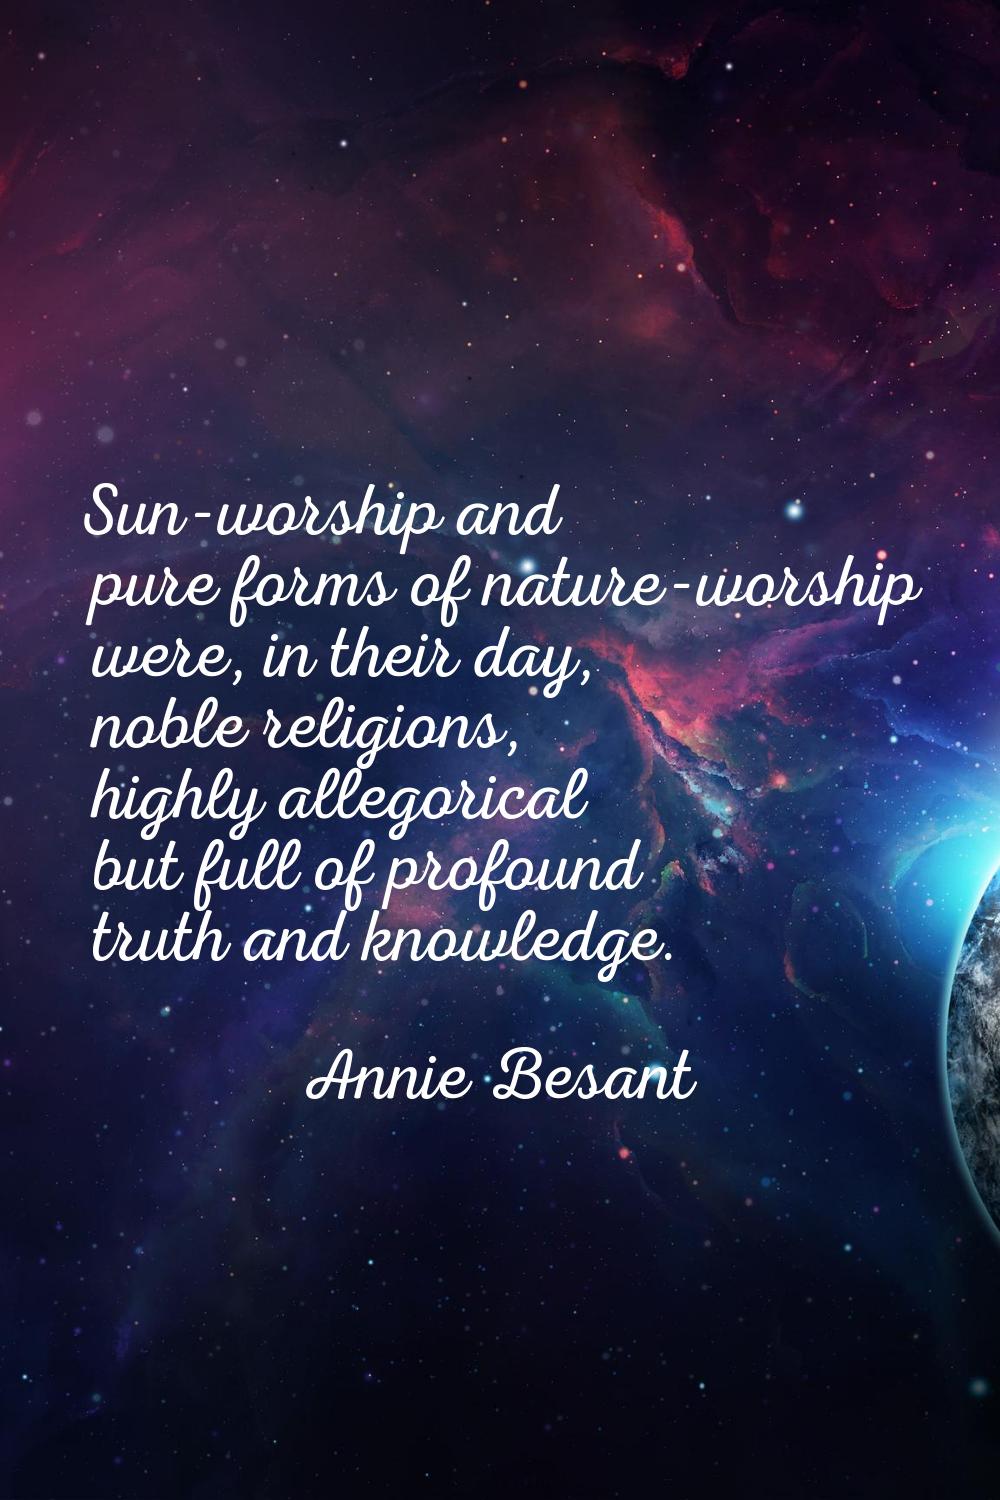 Sun-worship and pure forms of nature-worship were, in their day, noble religions, highly allegorica